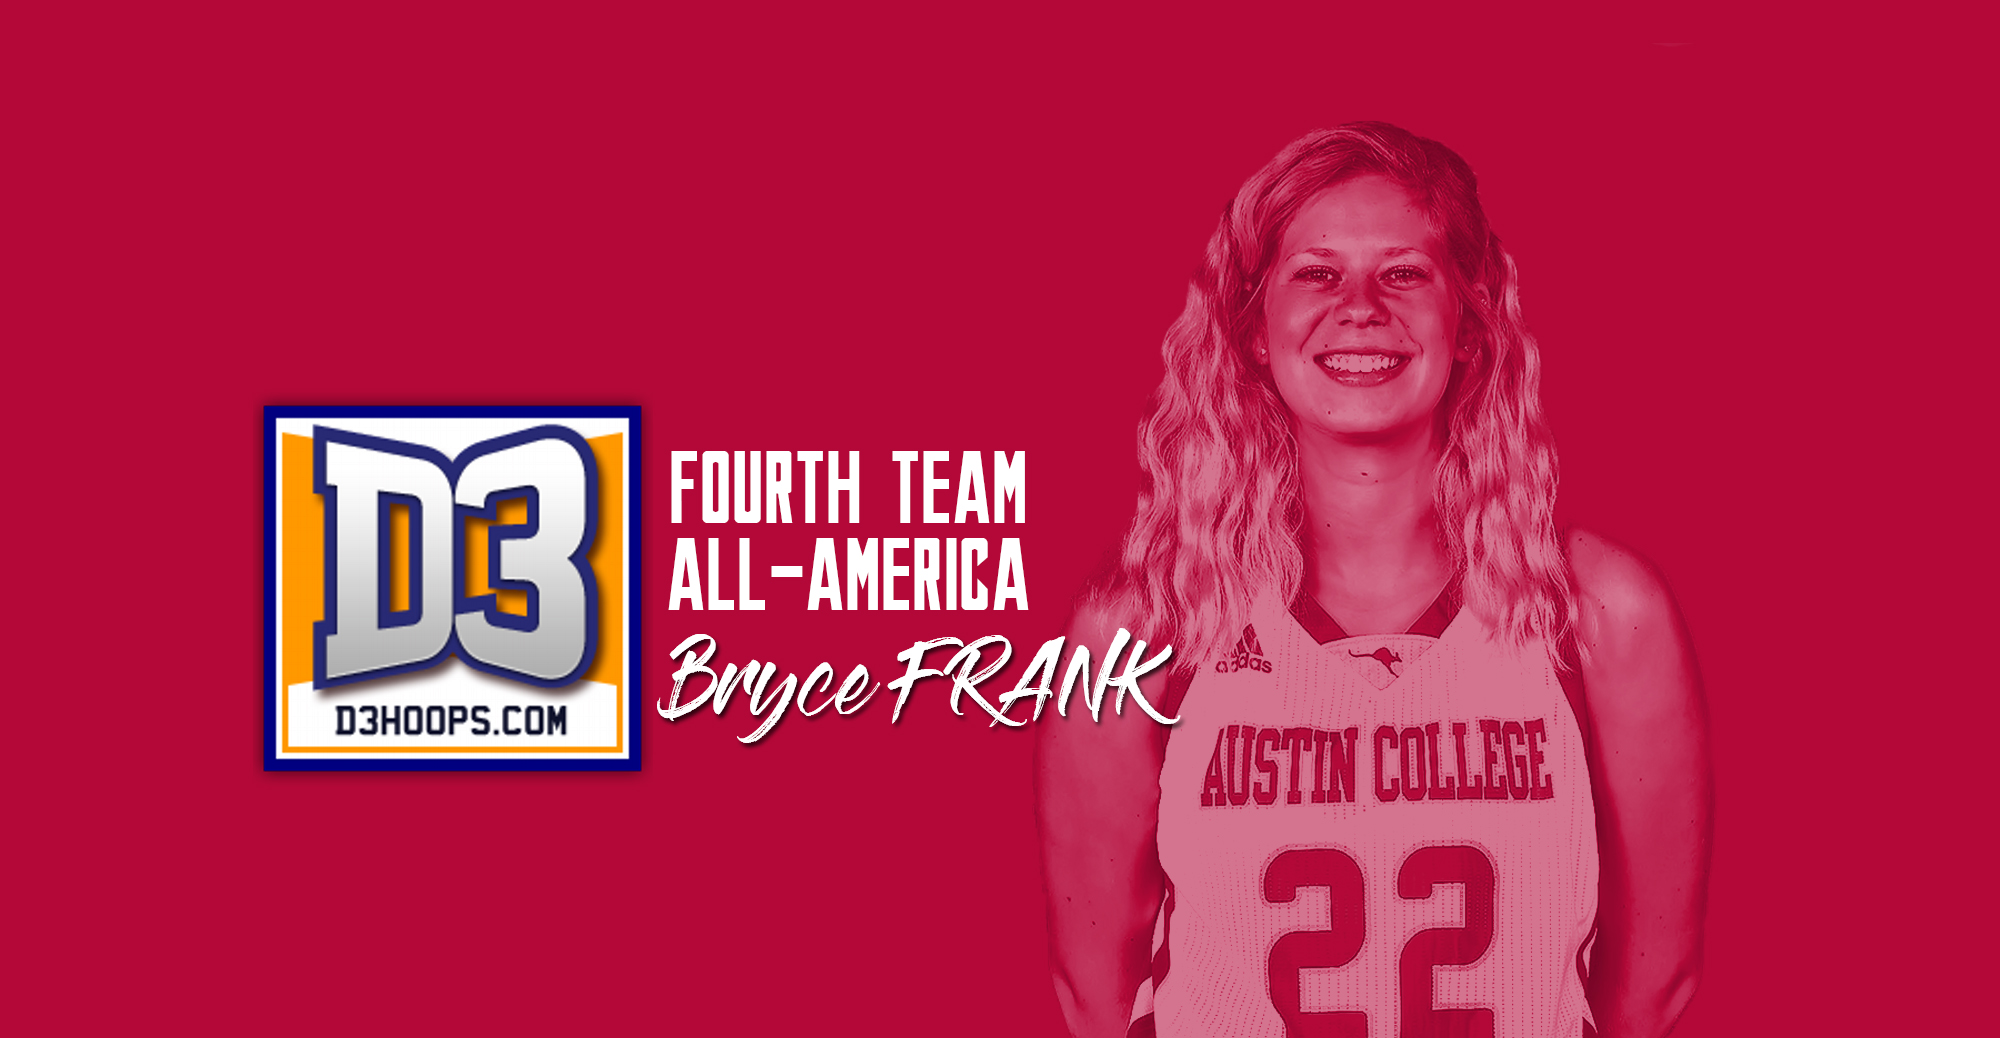 Frank Named Fourth Team All-America by D3Hoops